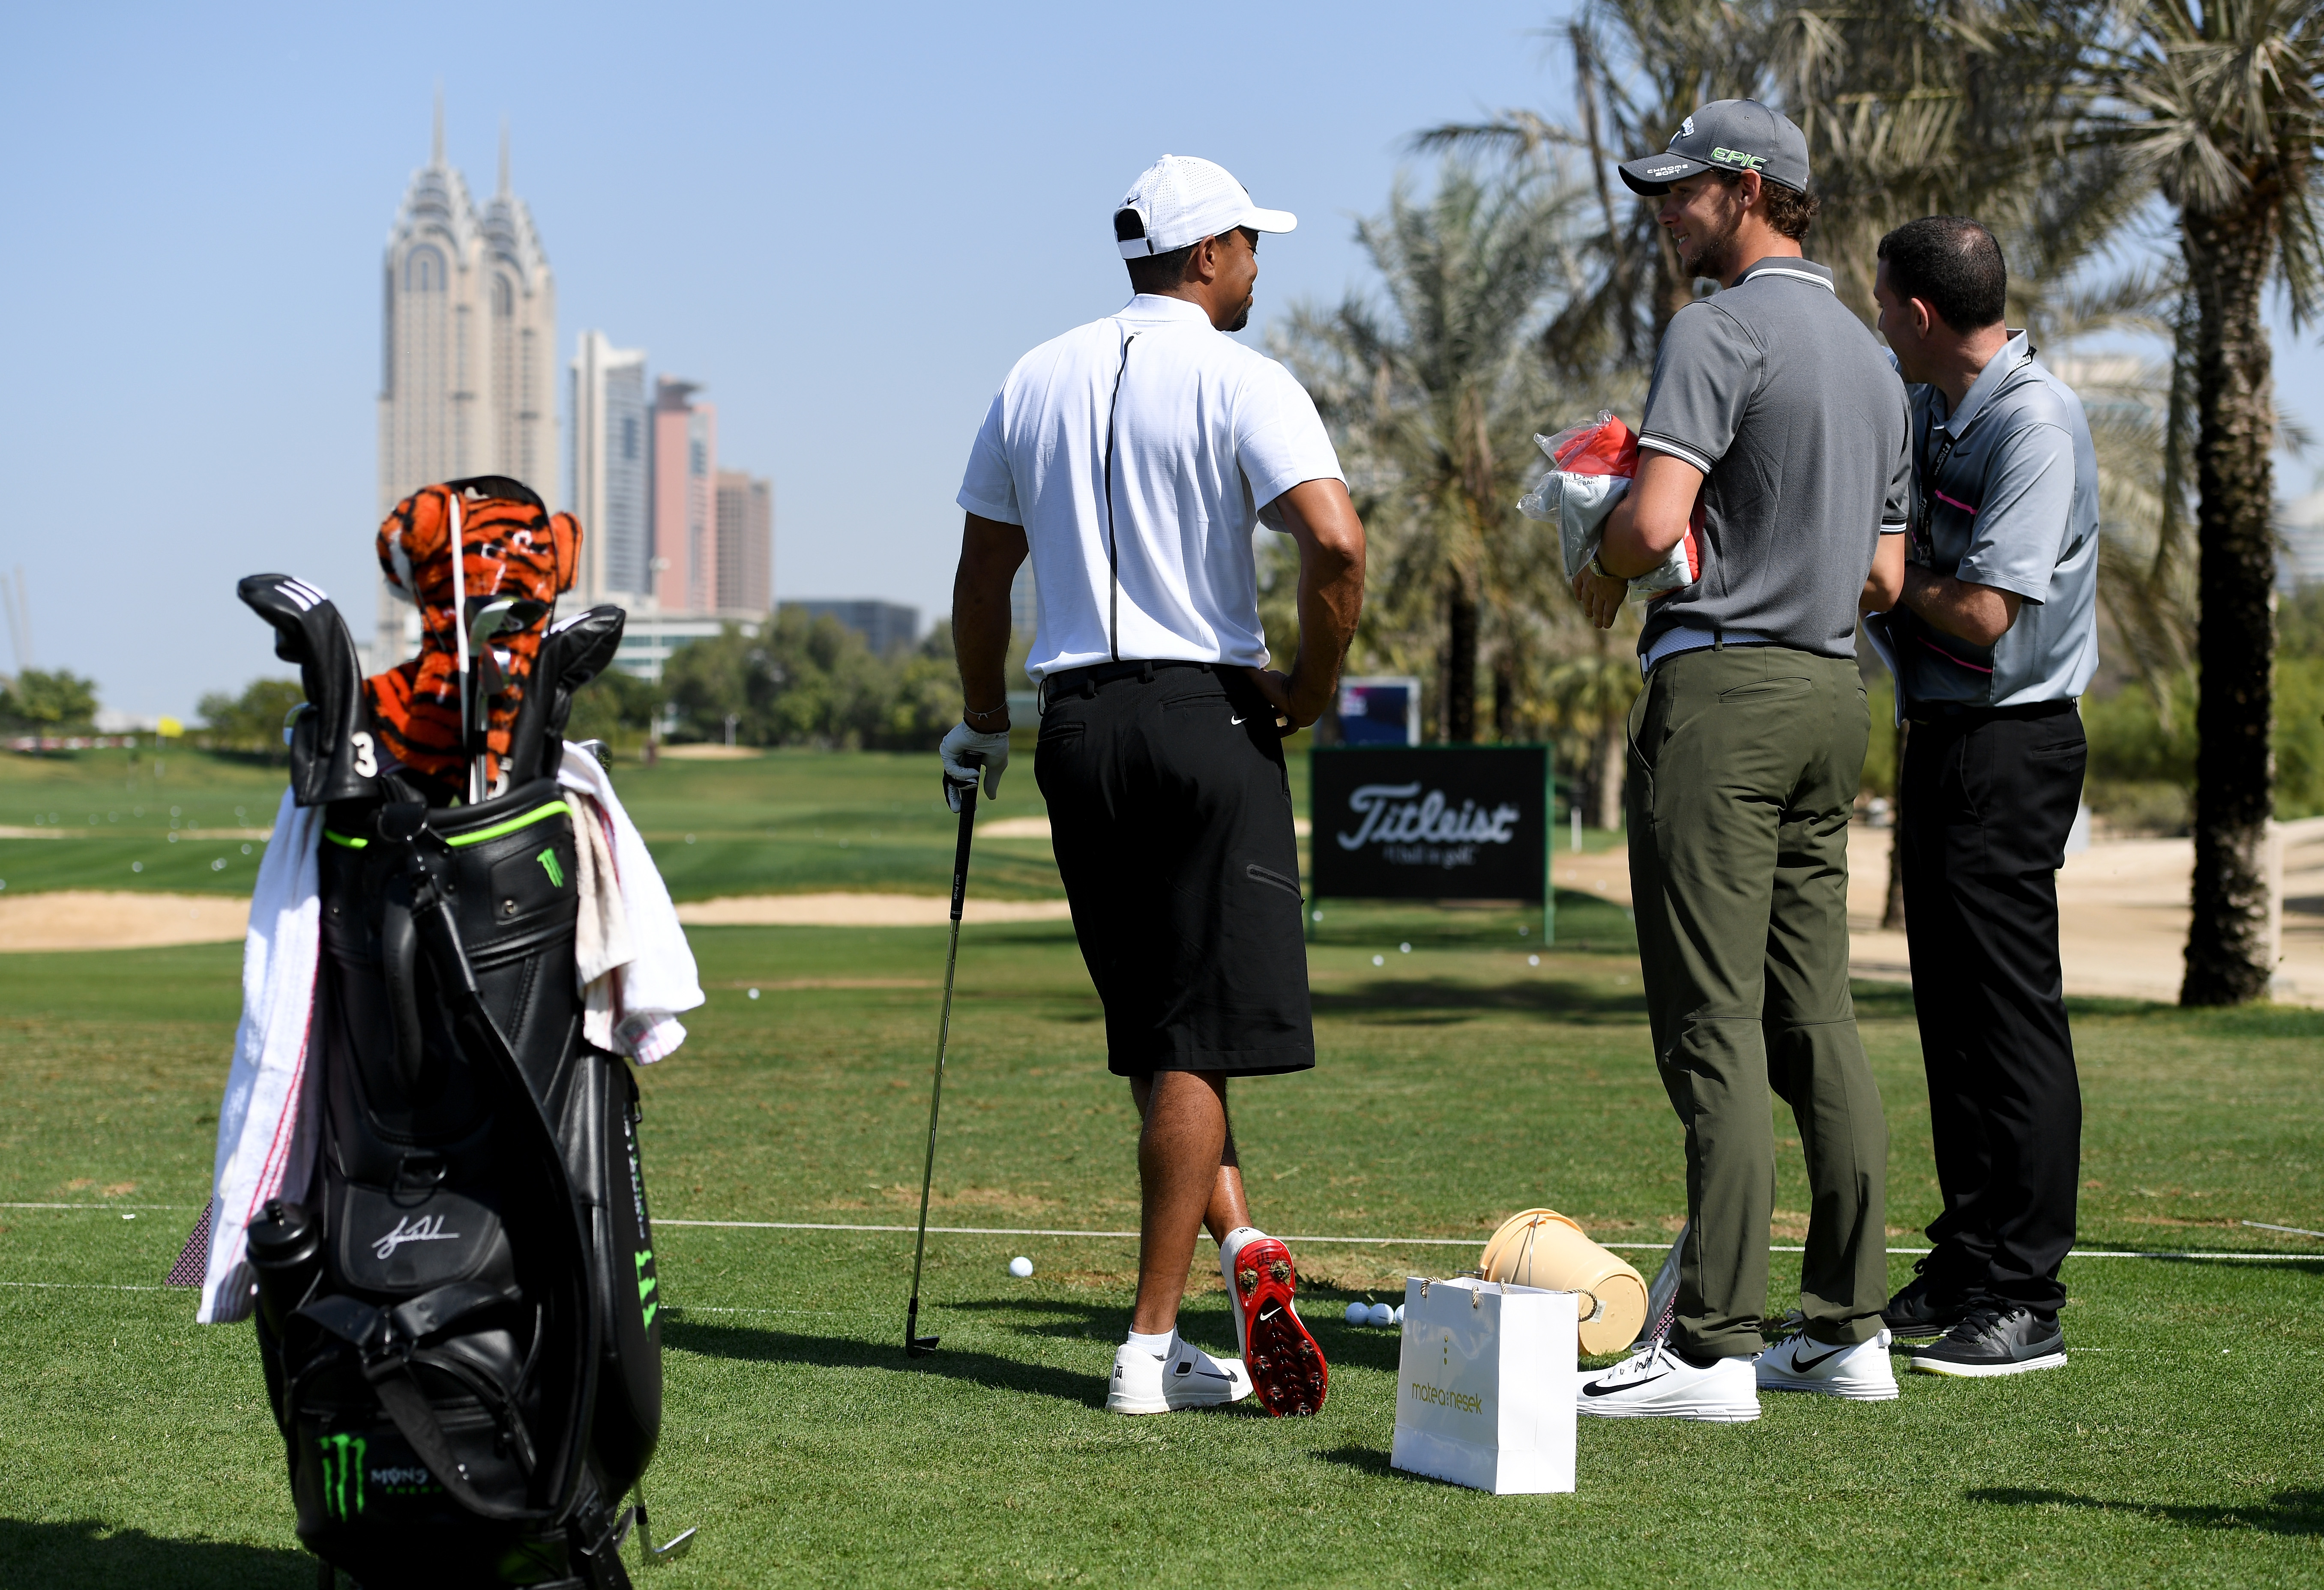 What's it like to work with Tiger Woods?